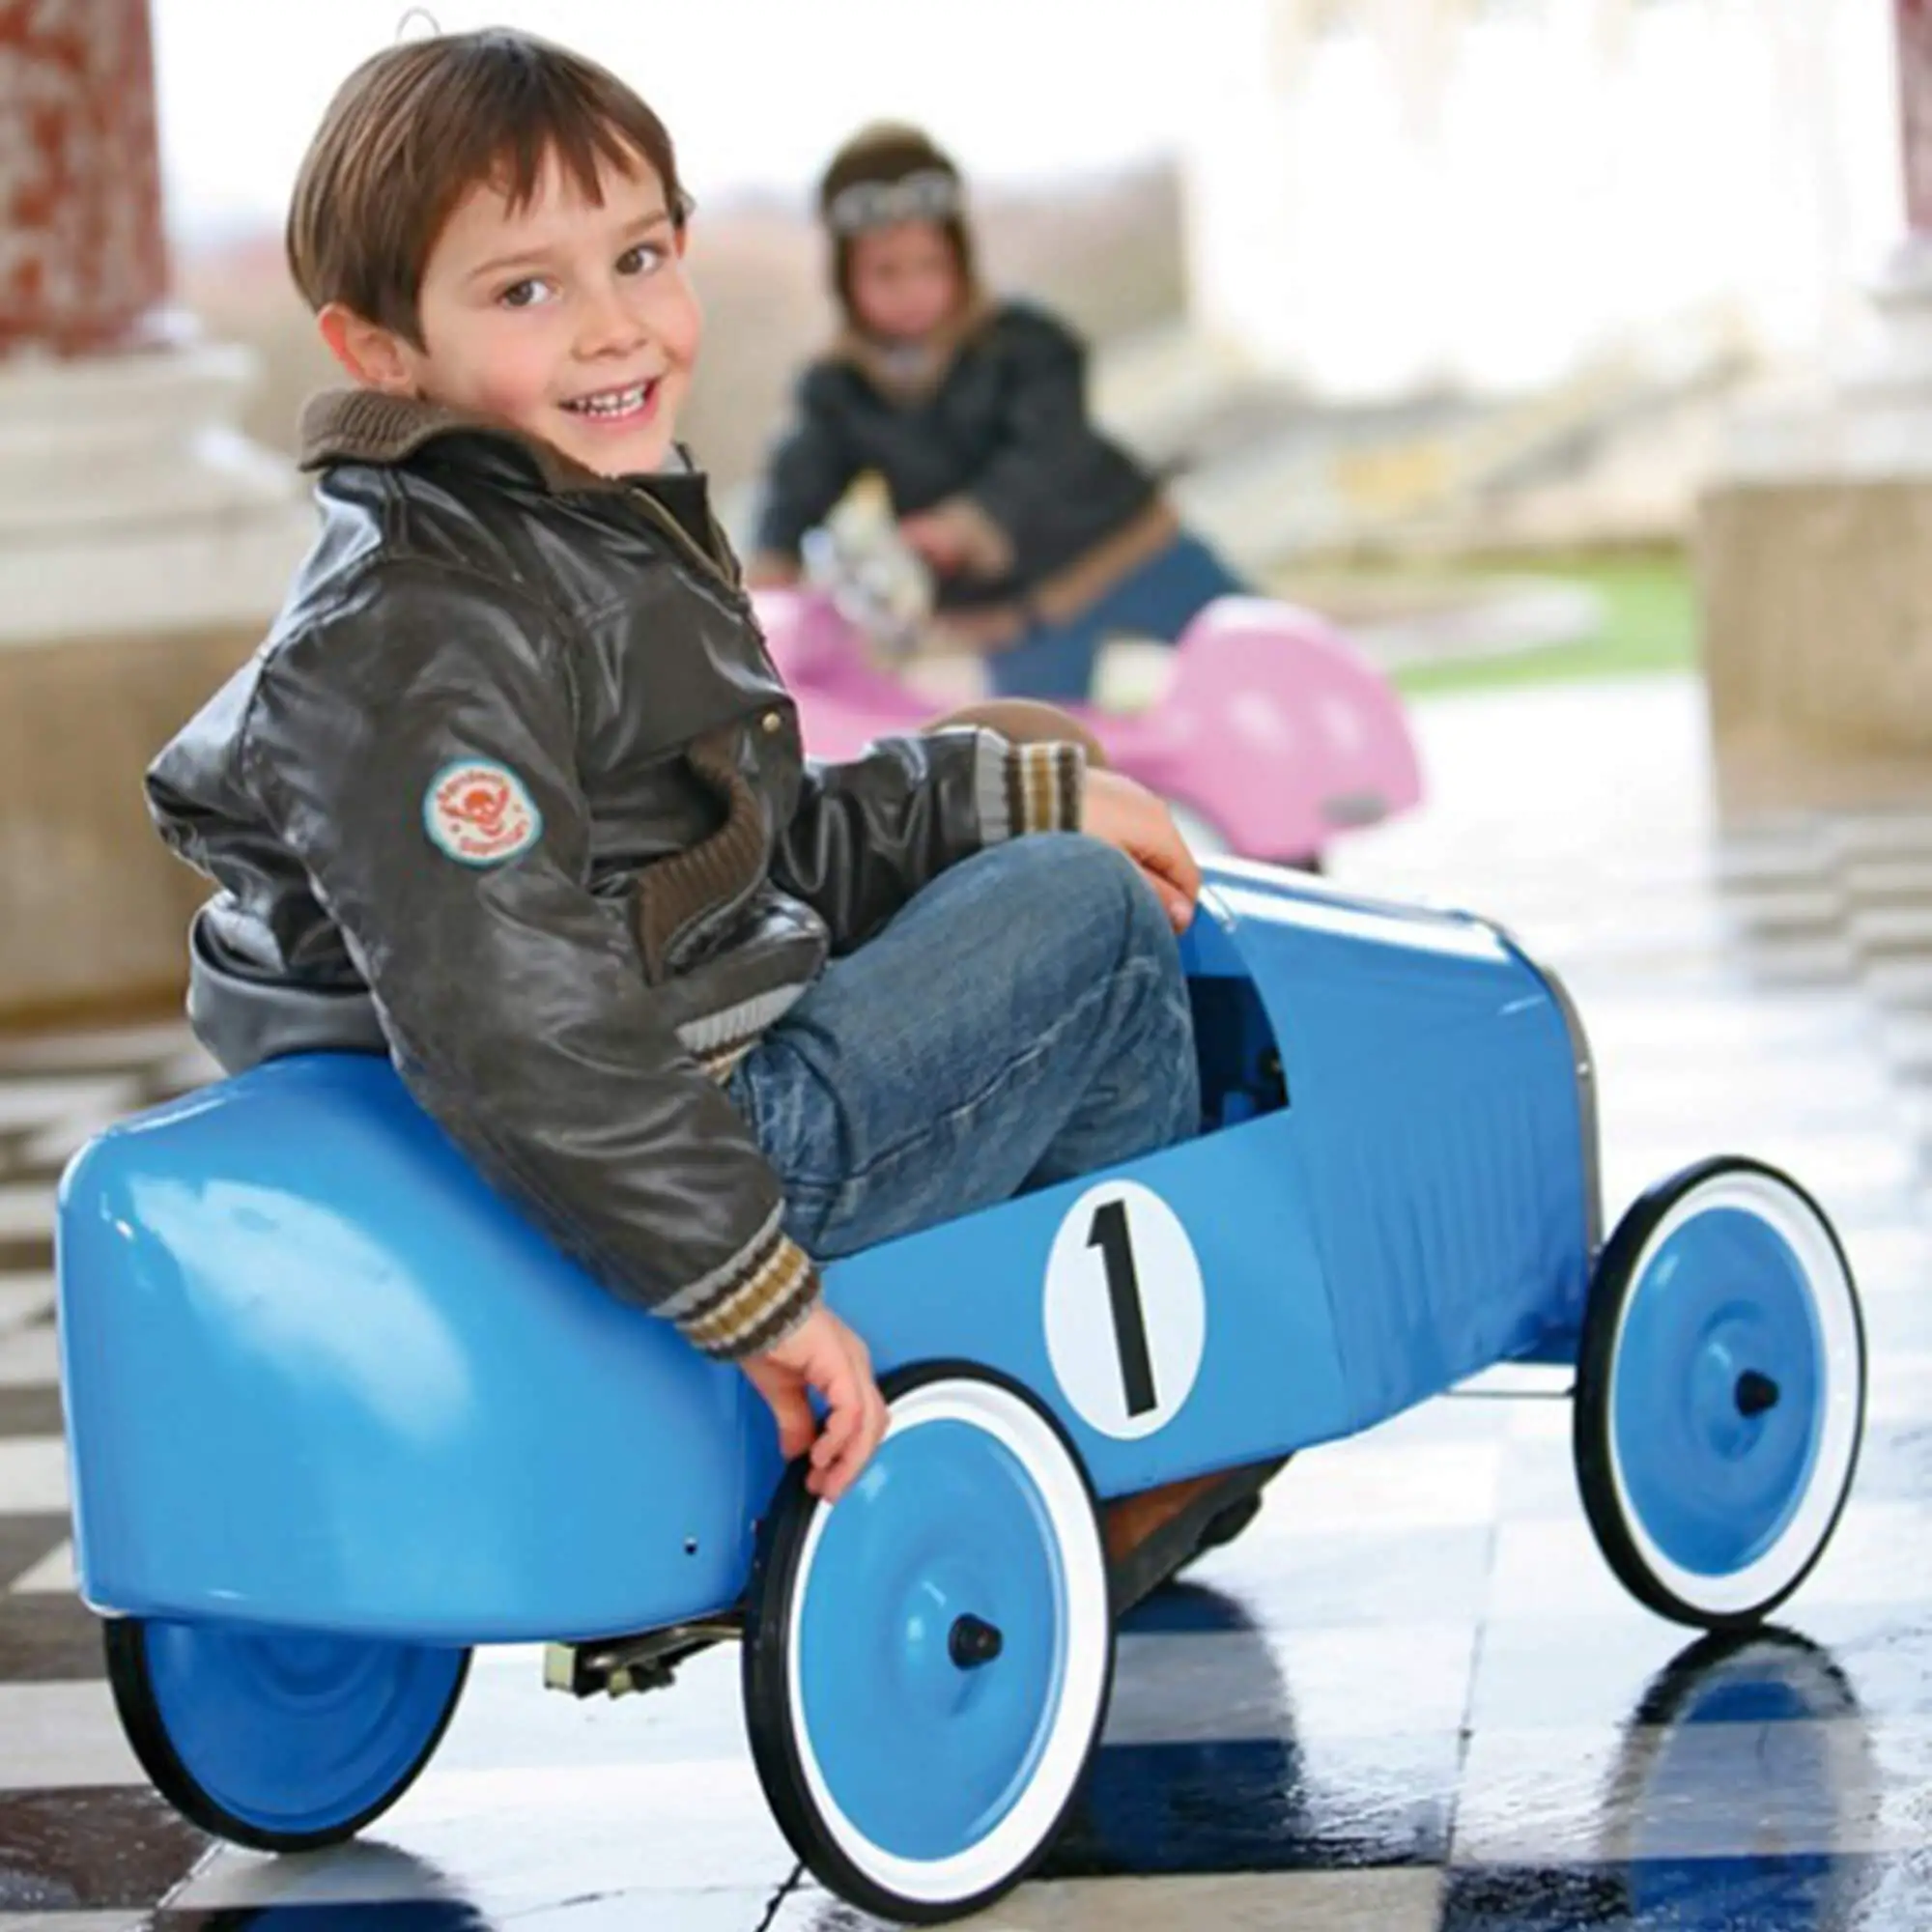 pedal cars for toddlers